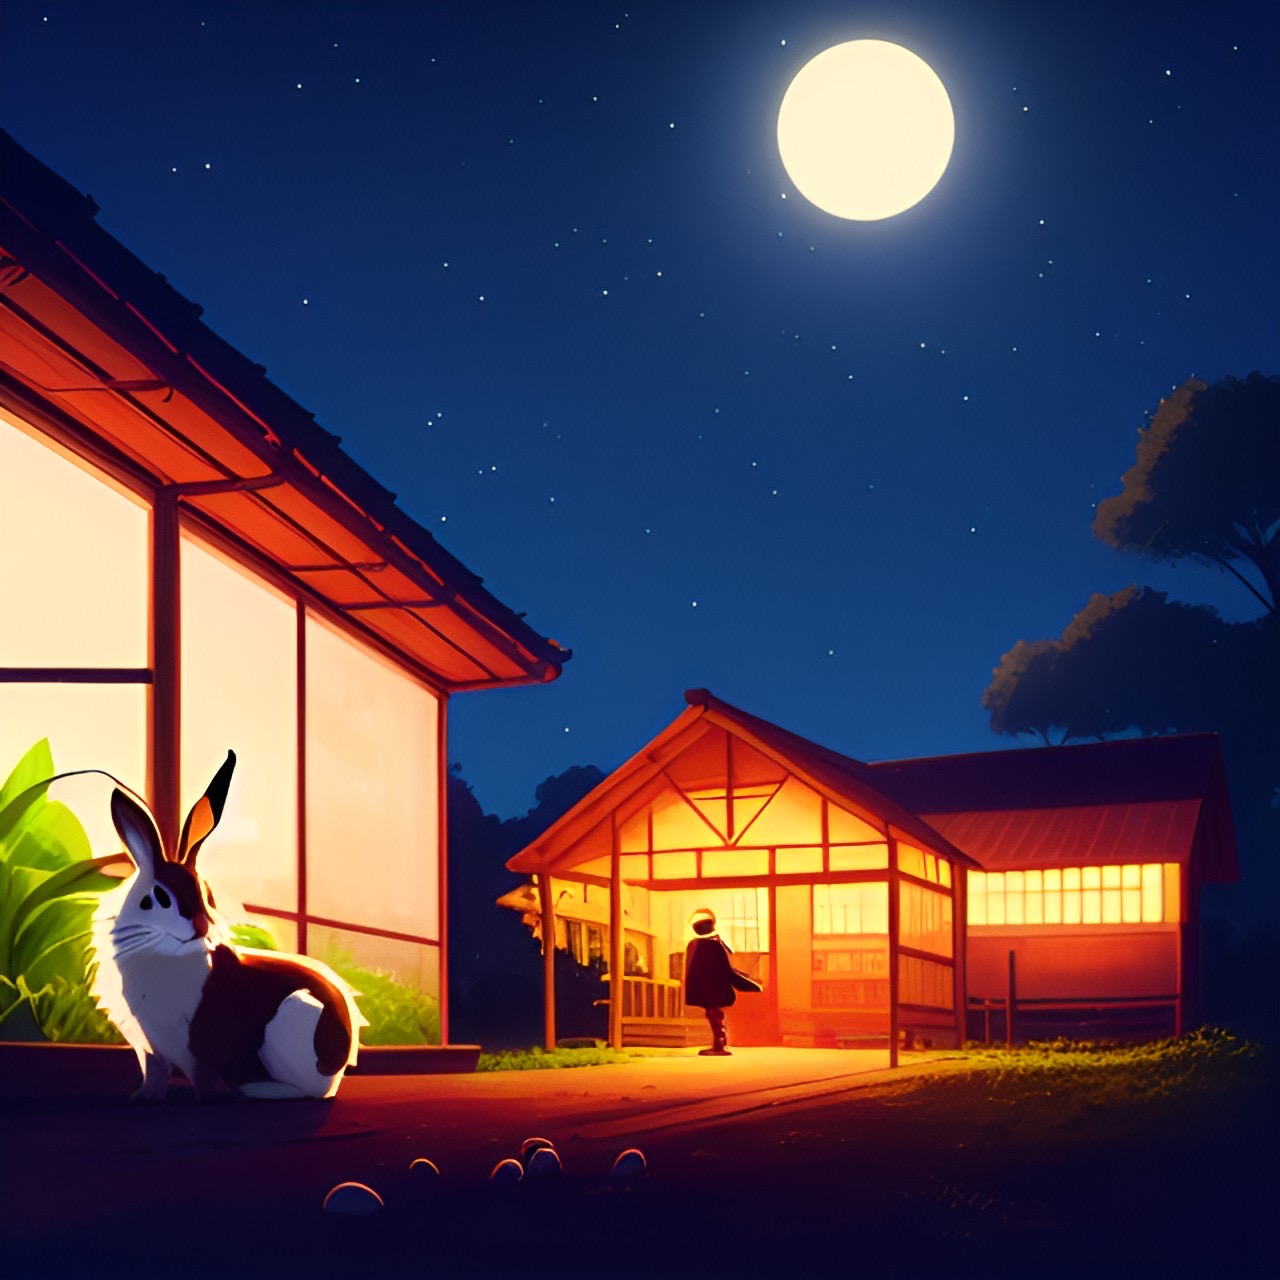 A rabbit in a garden at night